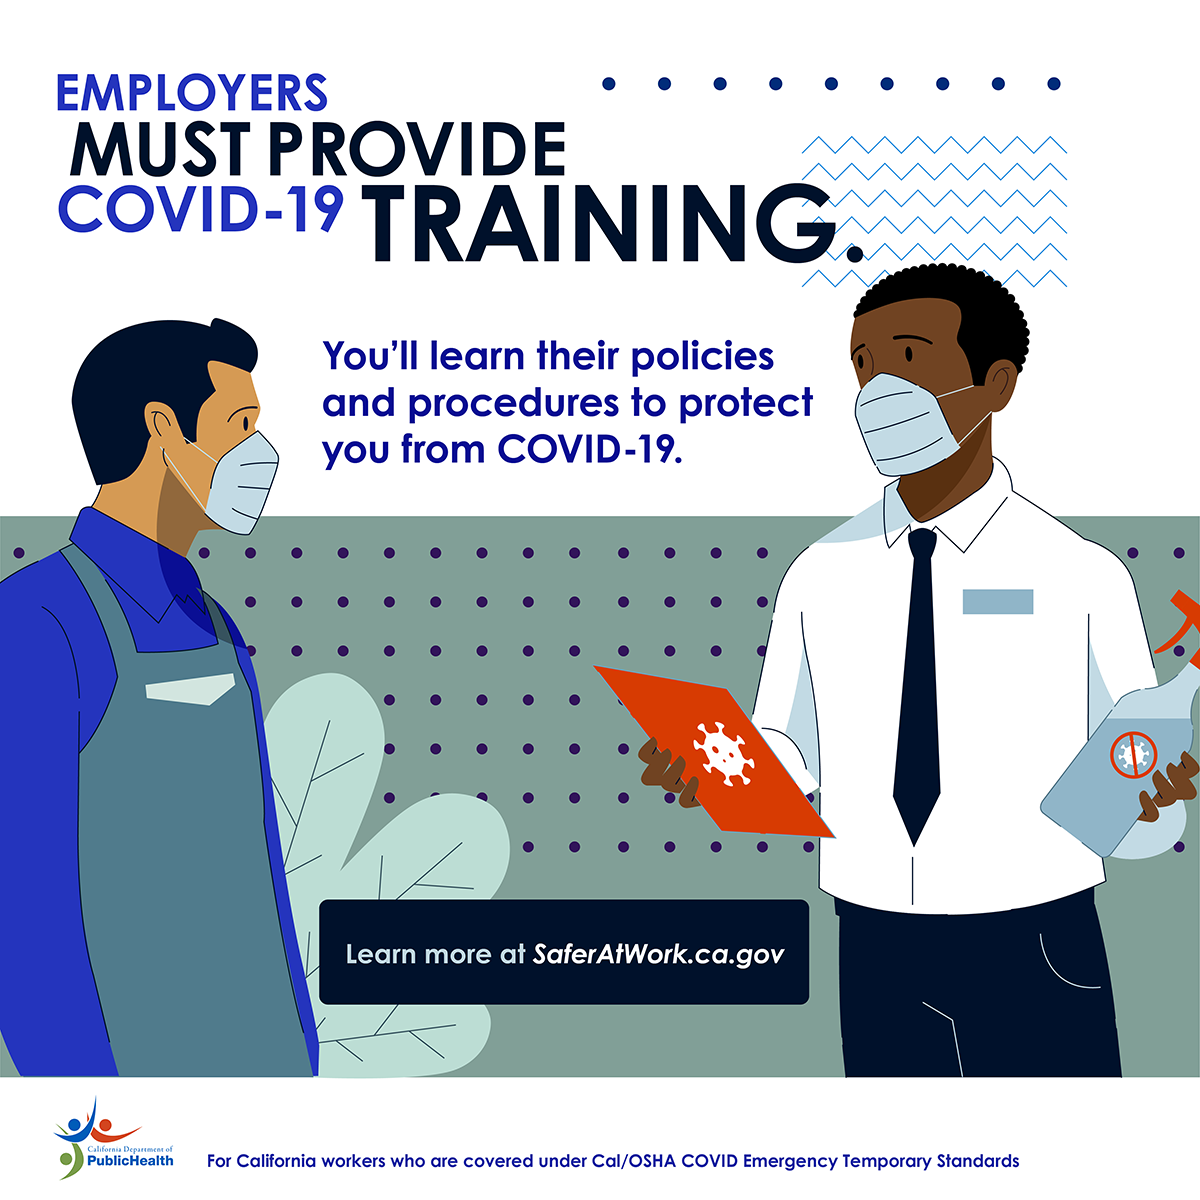 Employers must provide COVID-19 training. You'll learn their policies and procedures to protect you from COVID-19.